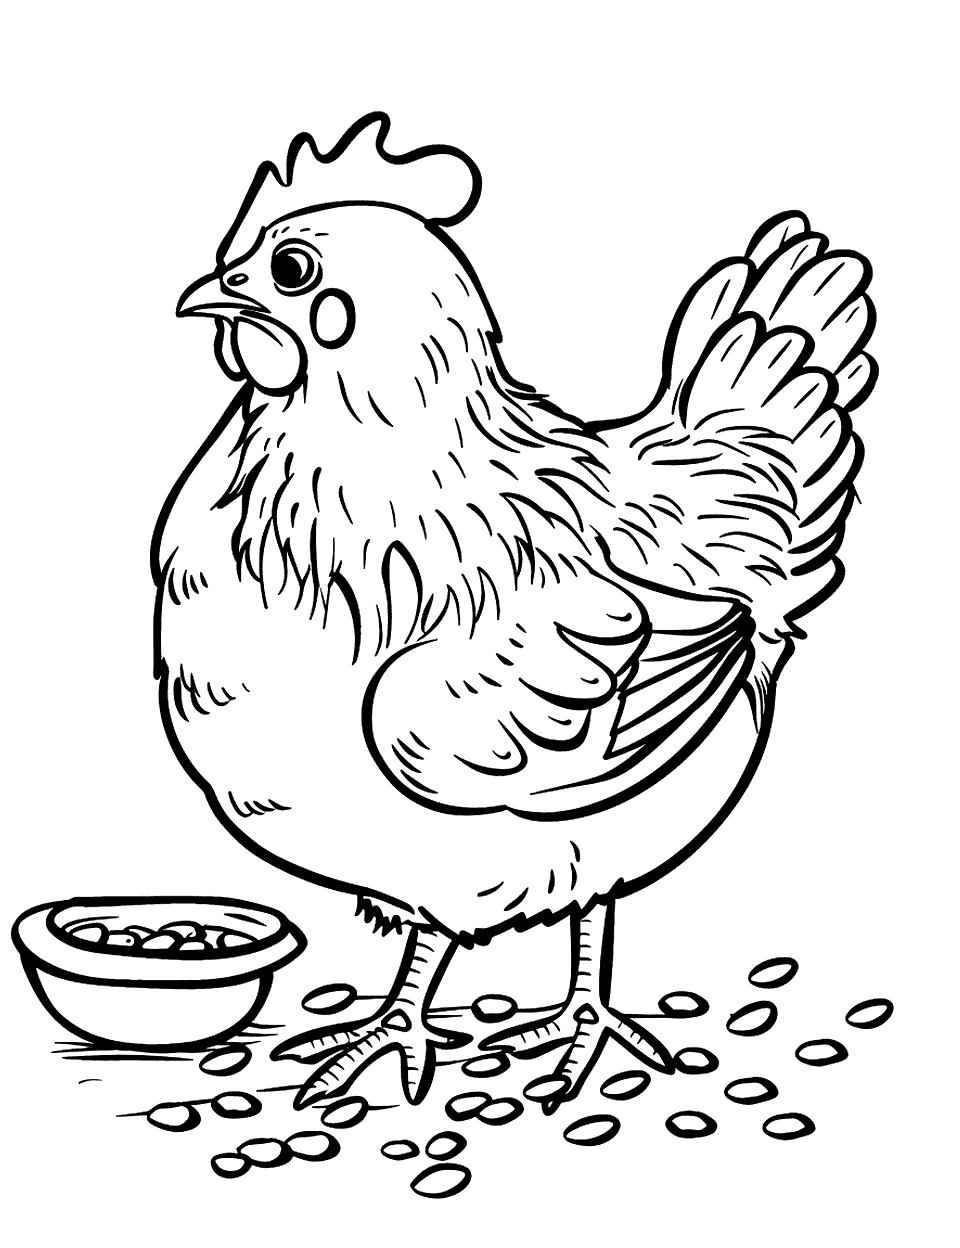 Chicken Enjoying Food Coloring Page - A happy chicken surrounded by grains and a small bowl of food.